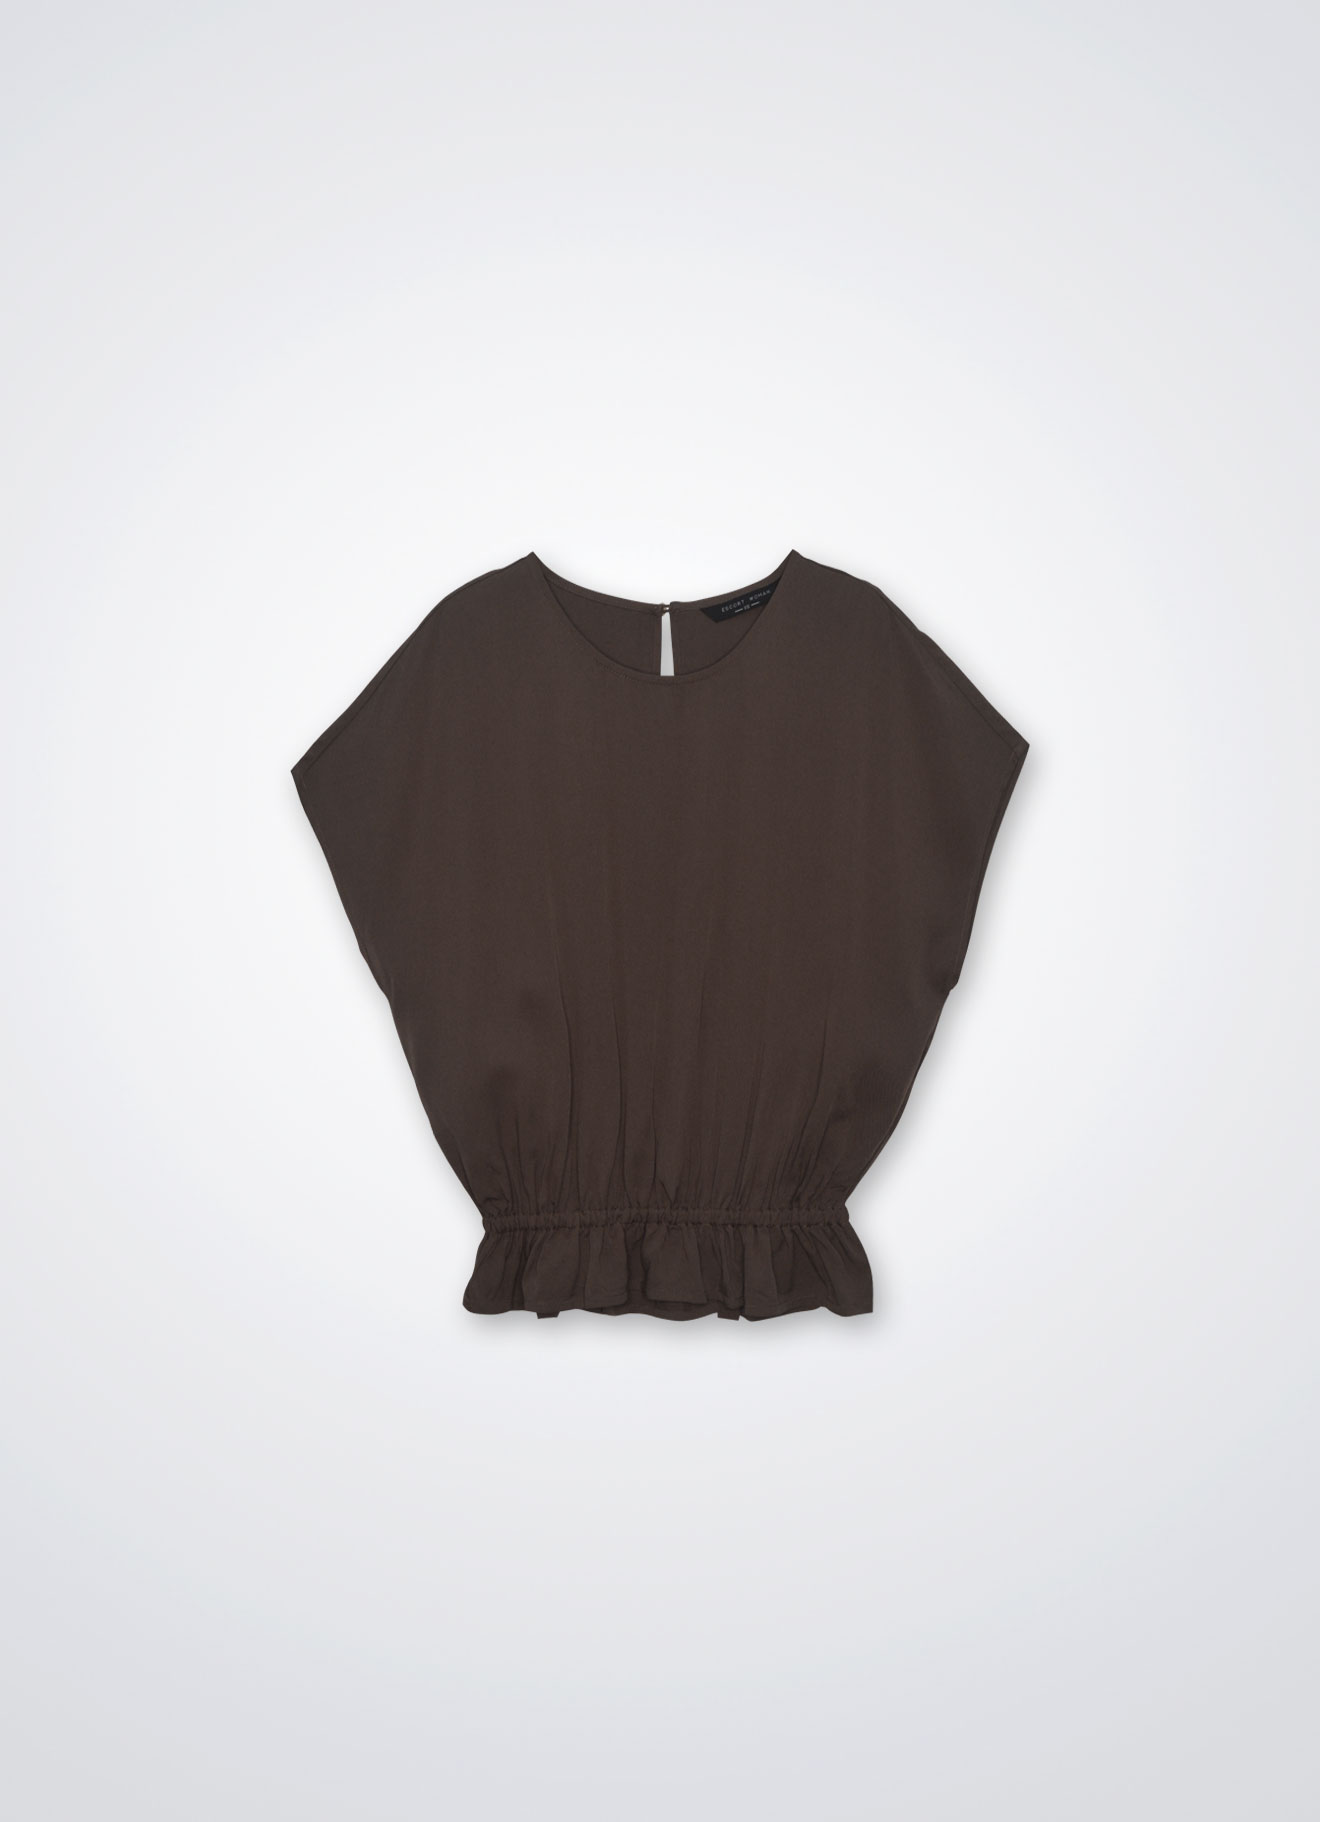 Partridge by Sleeve Blouse